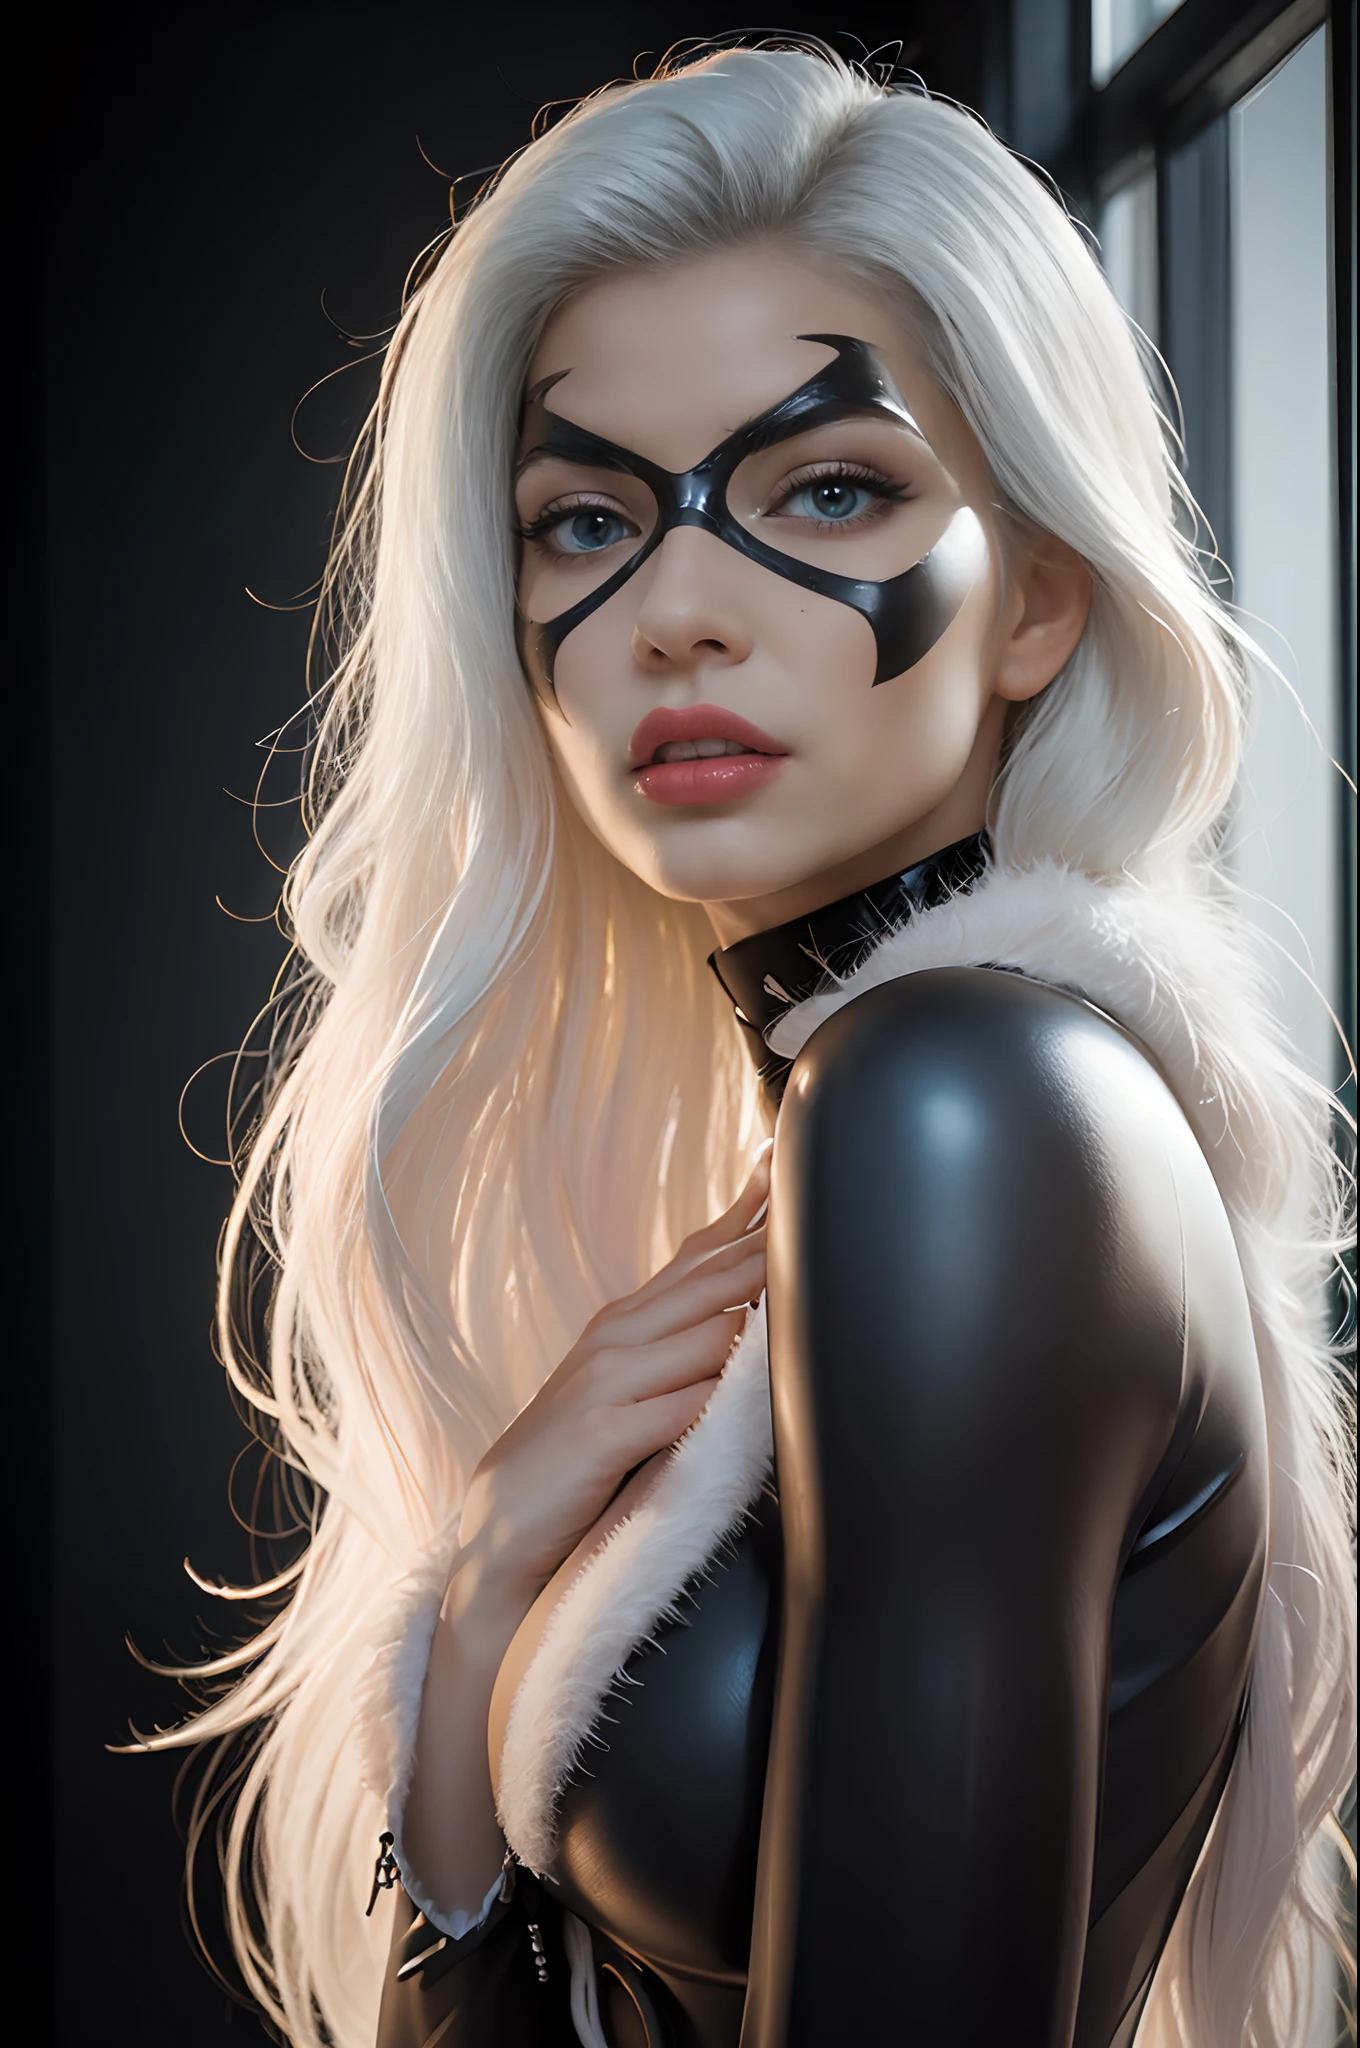 black cat,beautiful face,protruding breasts,white long hair,detailed fur texture,sharp focus,piercing eyes,intense gaze,delicate whiskers,elegant posture,mysterious aura,high contrast,soft shadows,vibrant colors,artistic rendering,realistic painting style,nighttime scenery,moonlight illumination,sleek physique,graceful movements,curved tail,intense expression,hidden secrets,mesmerizing presence,attention to details,photorealistic details,subtle highlights,darker tones,alluring beauty,sleek and shiny coat, frame,playful yet mysterious,engaging personality,intense connection,strong visual impact,stunning artwork,professional composition,high-resolution masterpiece,attention-grabbing,eye-catching composition,provocative and alluring,expressive and captivating gaze, platinum white hair, black mask